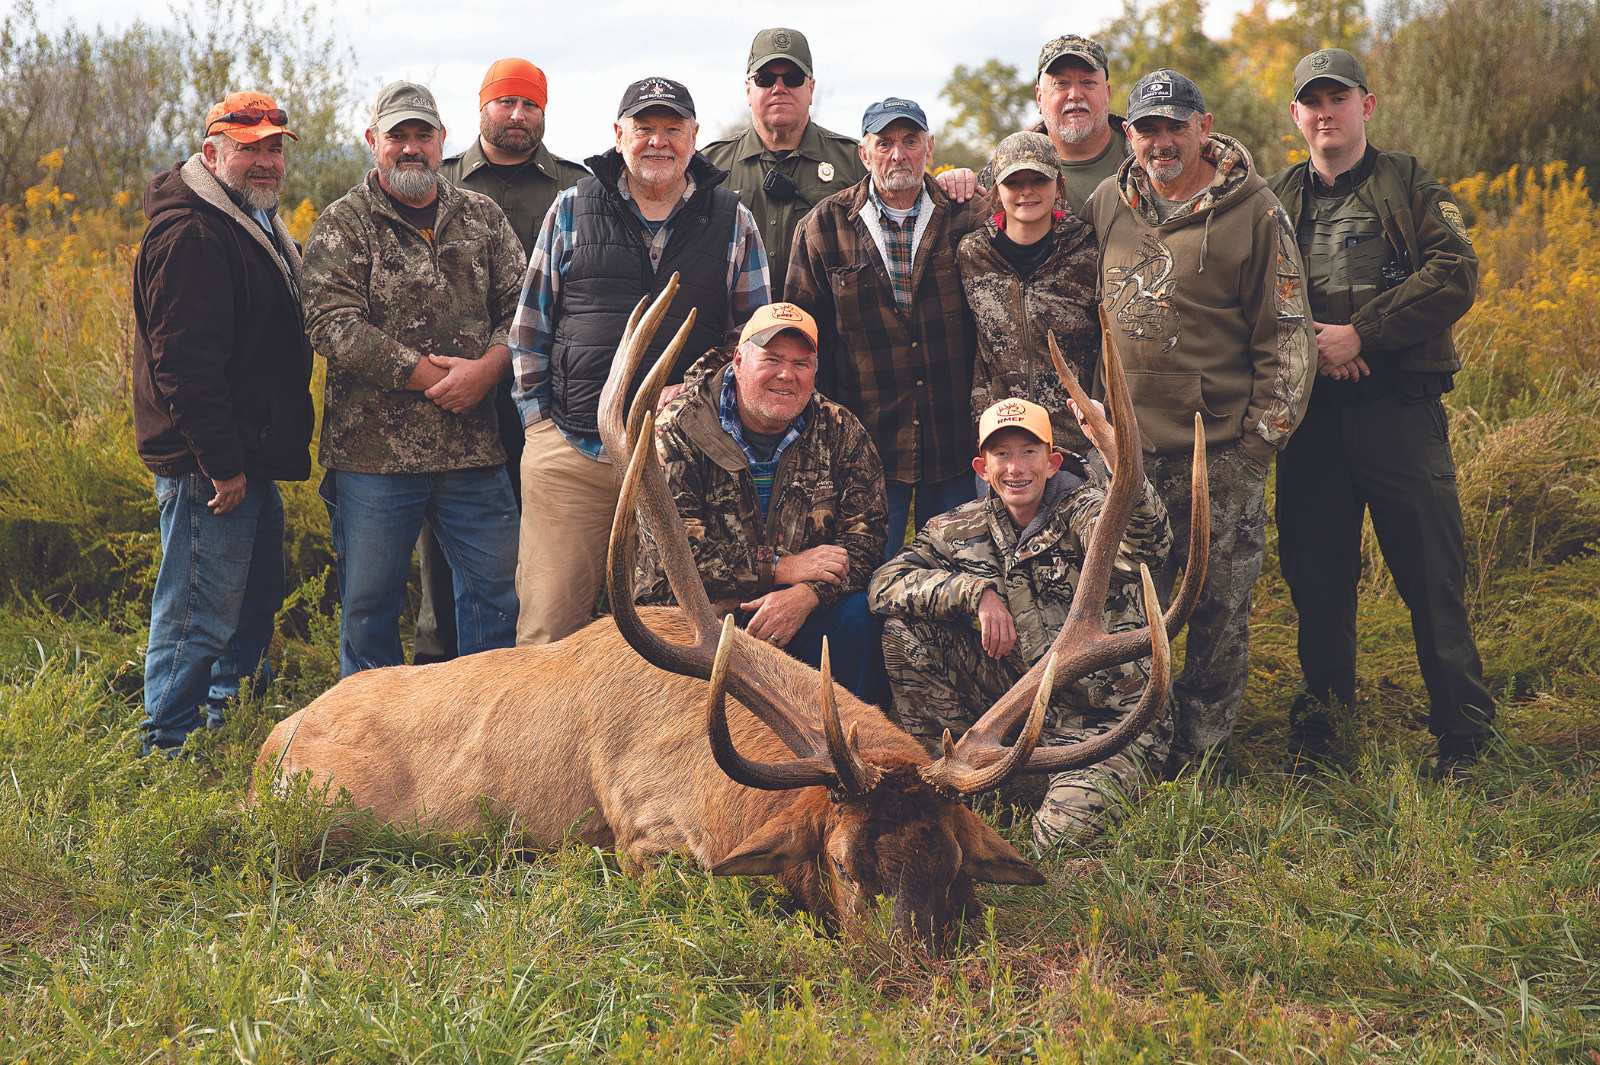 A large harvested bull elk lying on the groud, surrounded by a group of people.